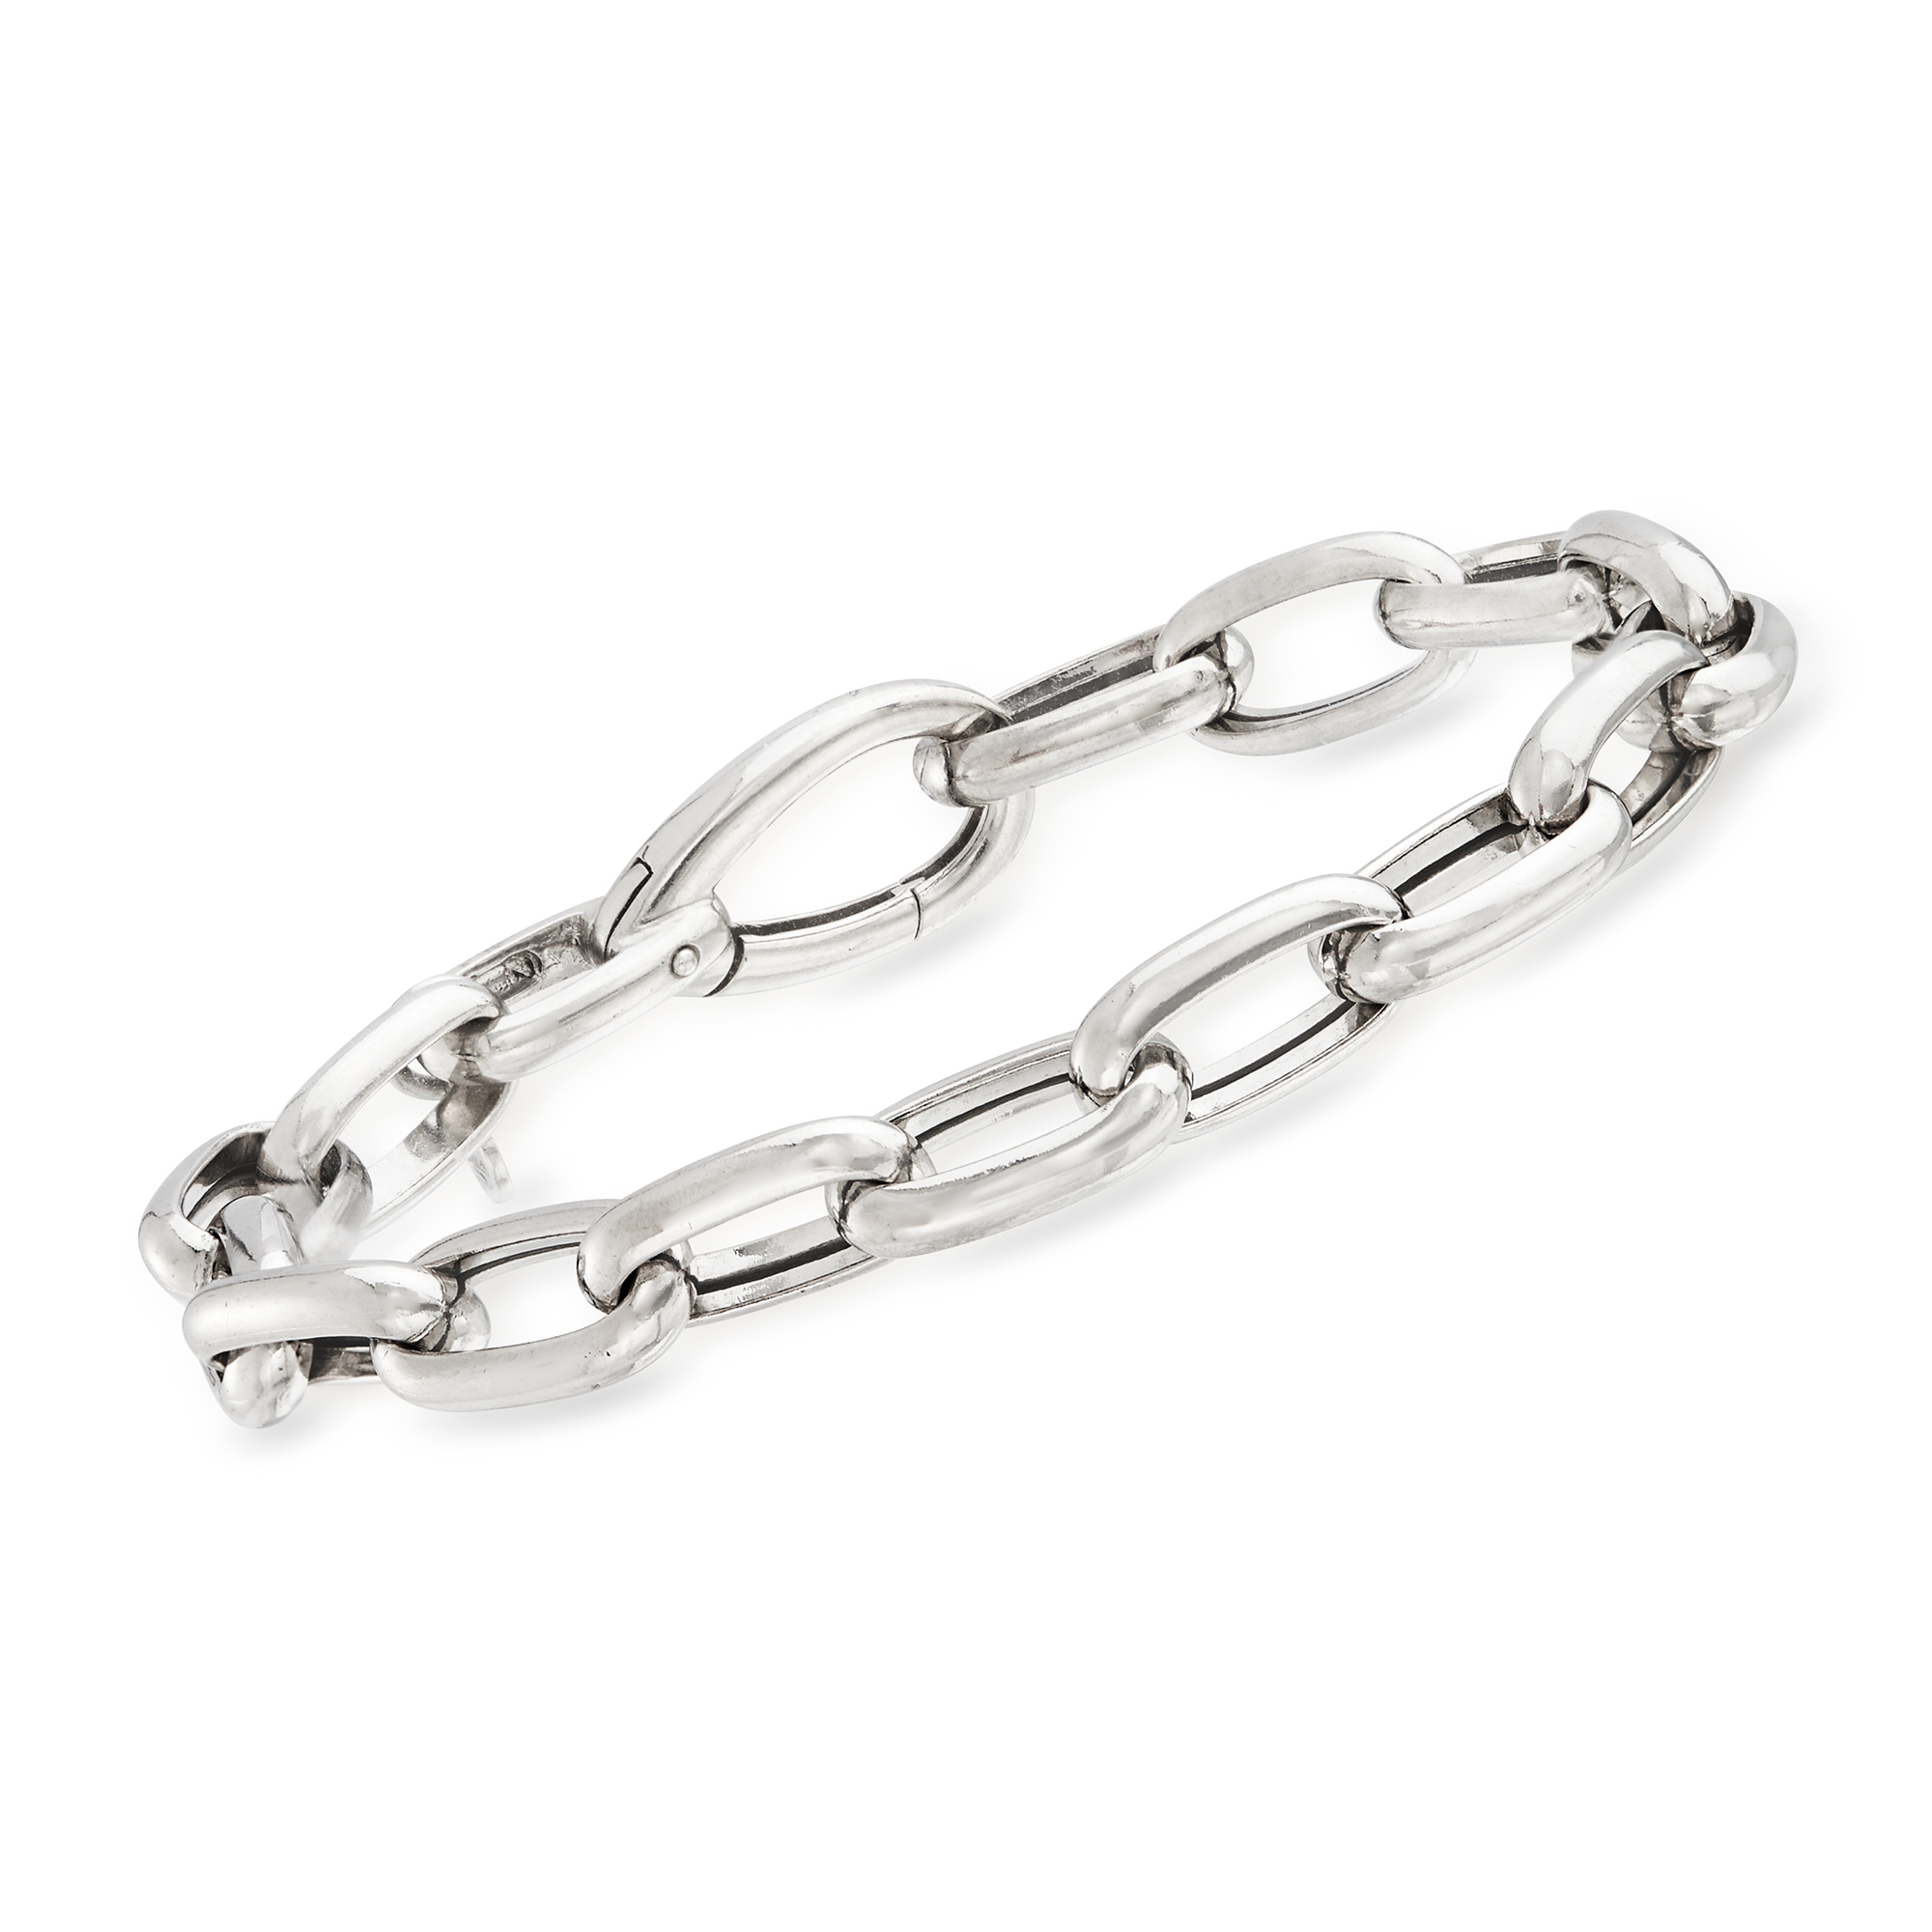 Ross-Simons Italian Sterling Silver Brushed and Polished Xo Link Bracelet